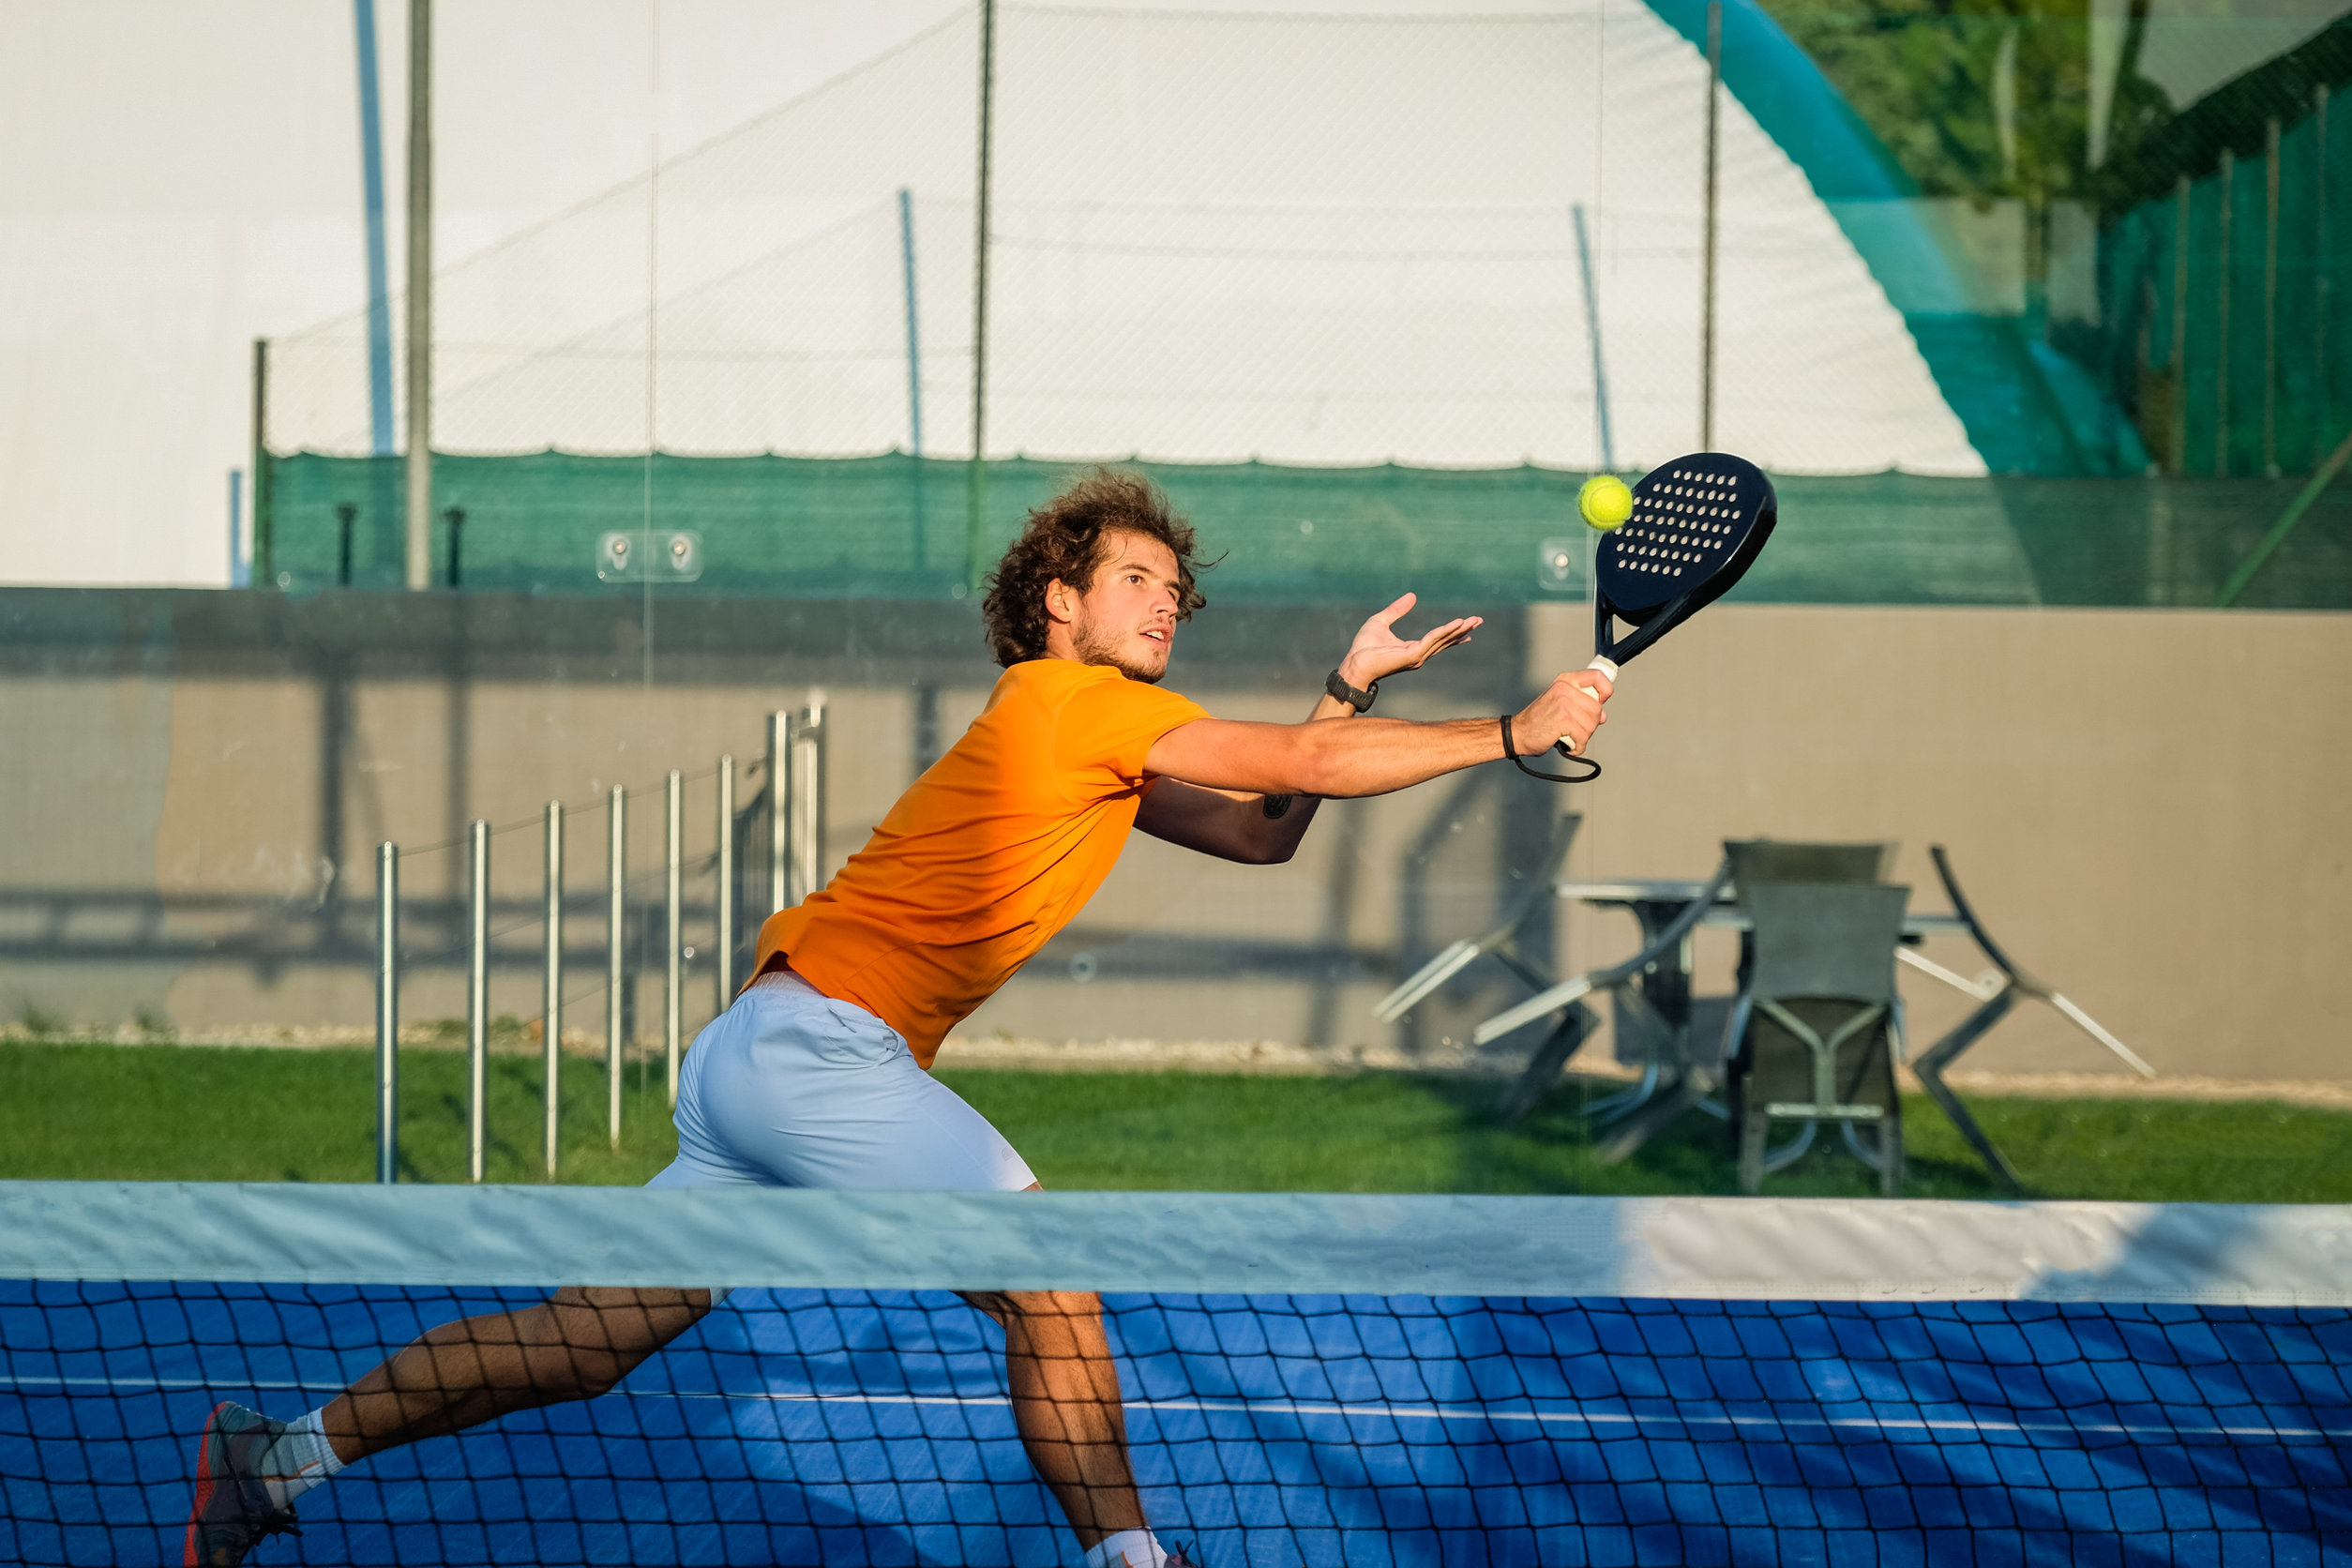 Padel match in a blue grass padel court - Padel player playing a